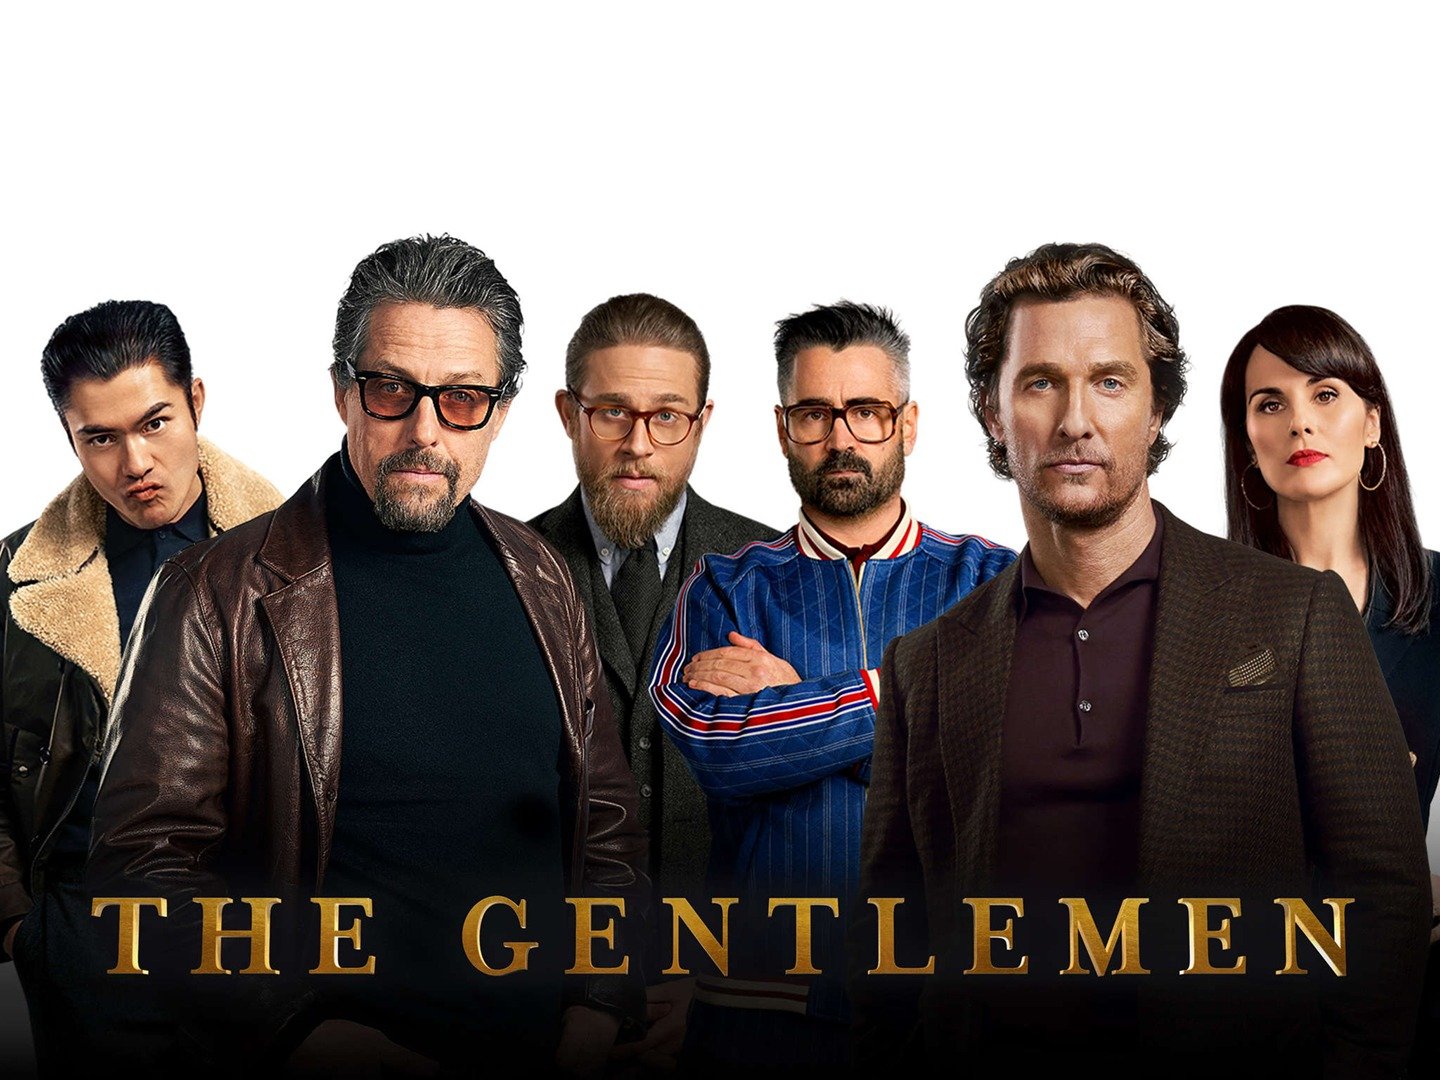 The Gentlemen: Name the Review - Trailers & Videos - Rotten Tomatoes